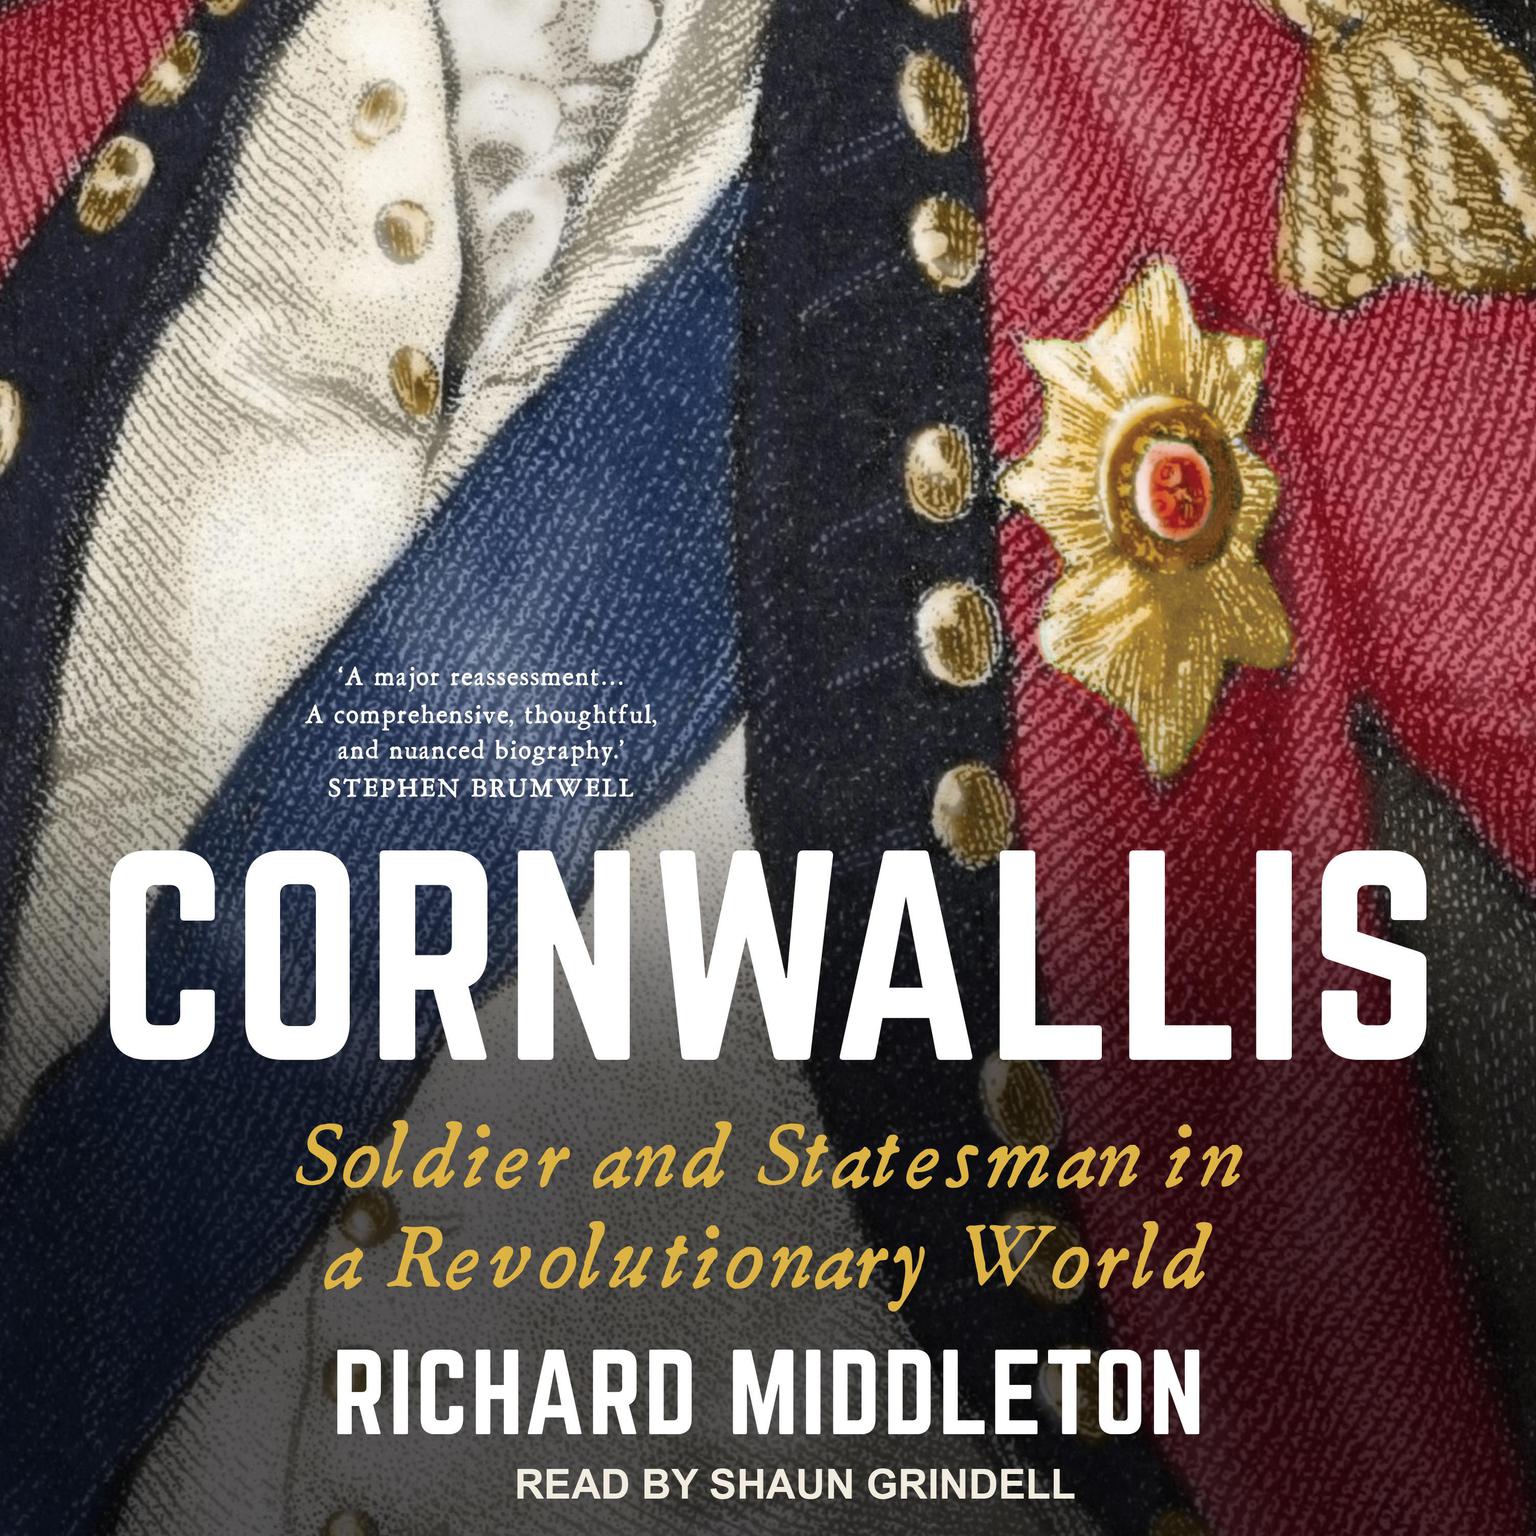 Cornwallis: Soldier and Statesman in a Revolutionary World Audiobook, by Richard Middleton